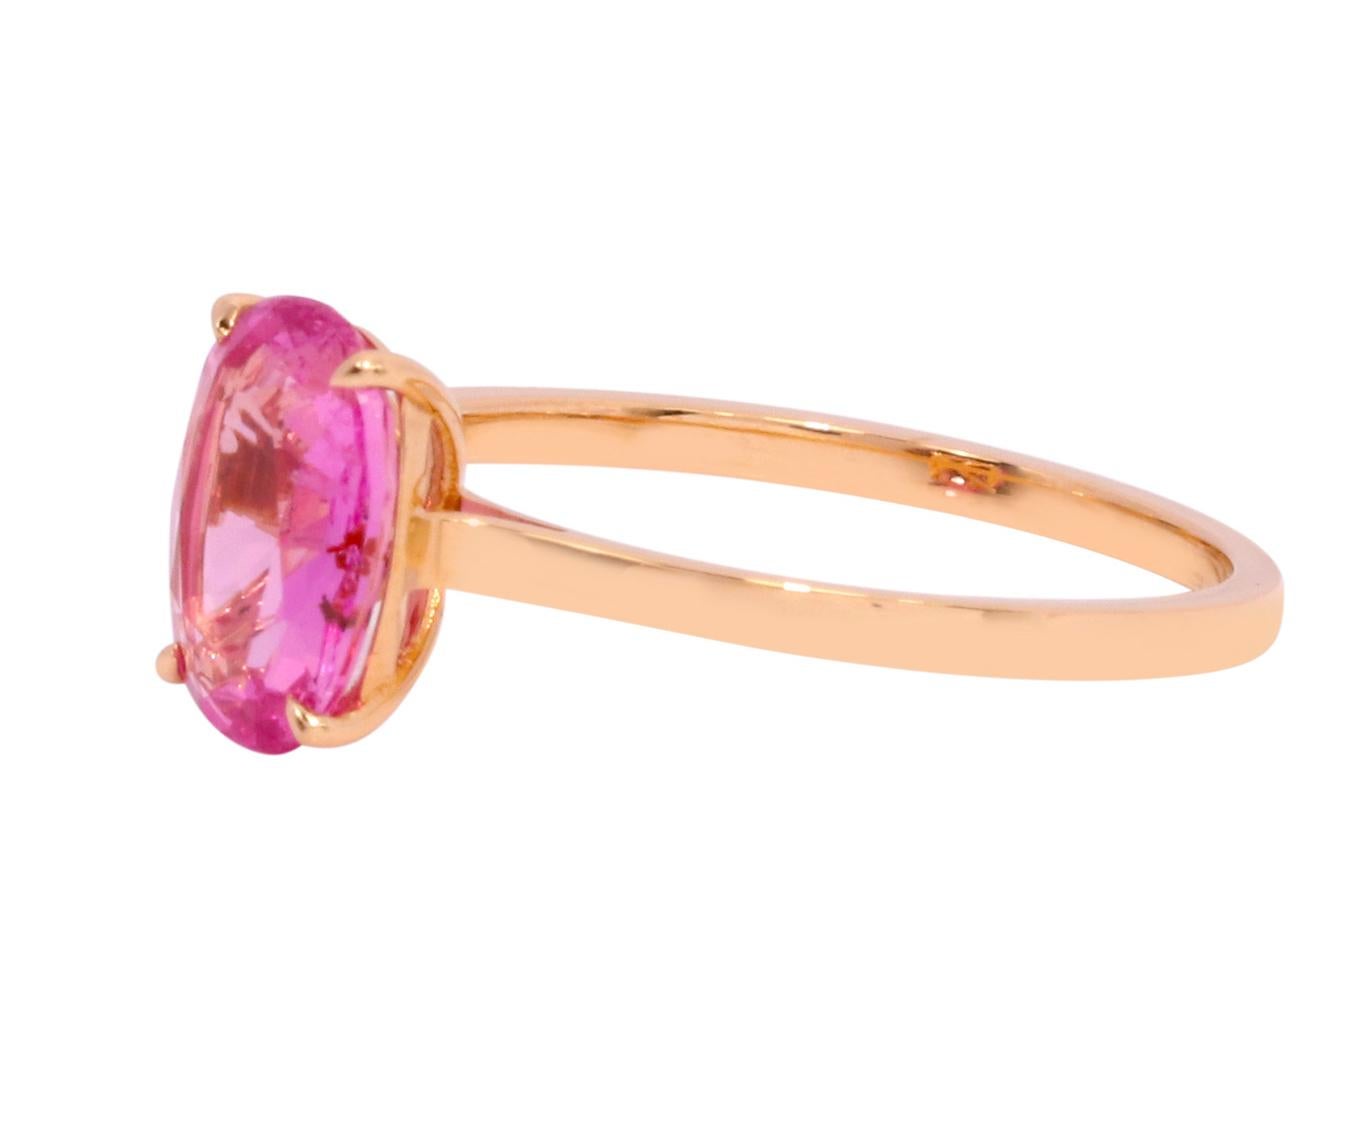 18 Karat Rose Gold 1.96 Carats Pink Sapphire Oval-Cut Ring in Prong Setting

Defining modern elegance at its best, this striking Oval-Cut Solitaire Pink-Sapphire is exquisite. Cradled in a four-prong setting, this contemporary classic is bound to